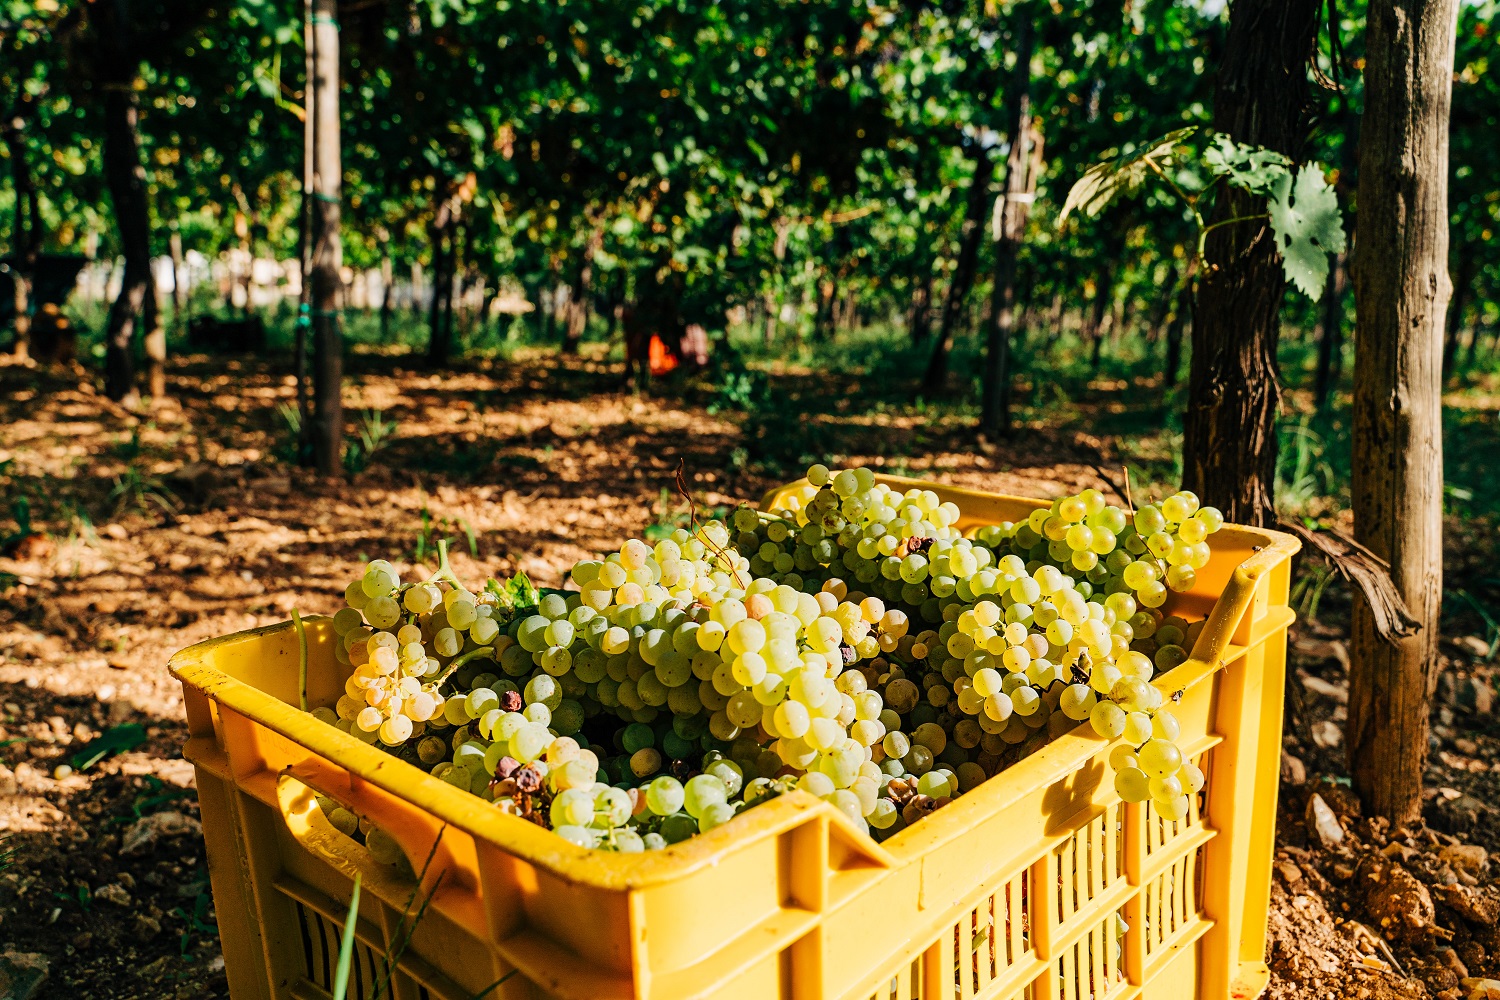 Pinot Bianco is one of Italy's most popular white grapes